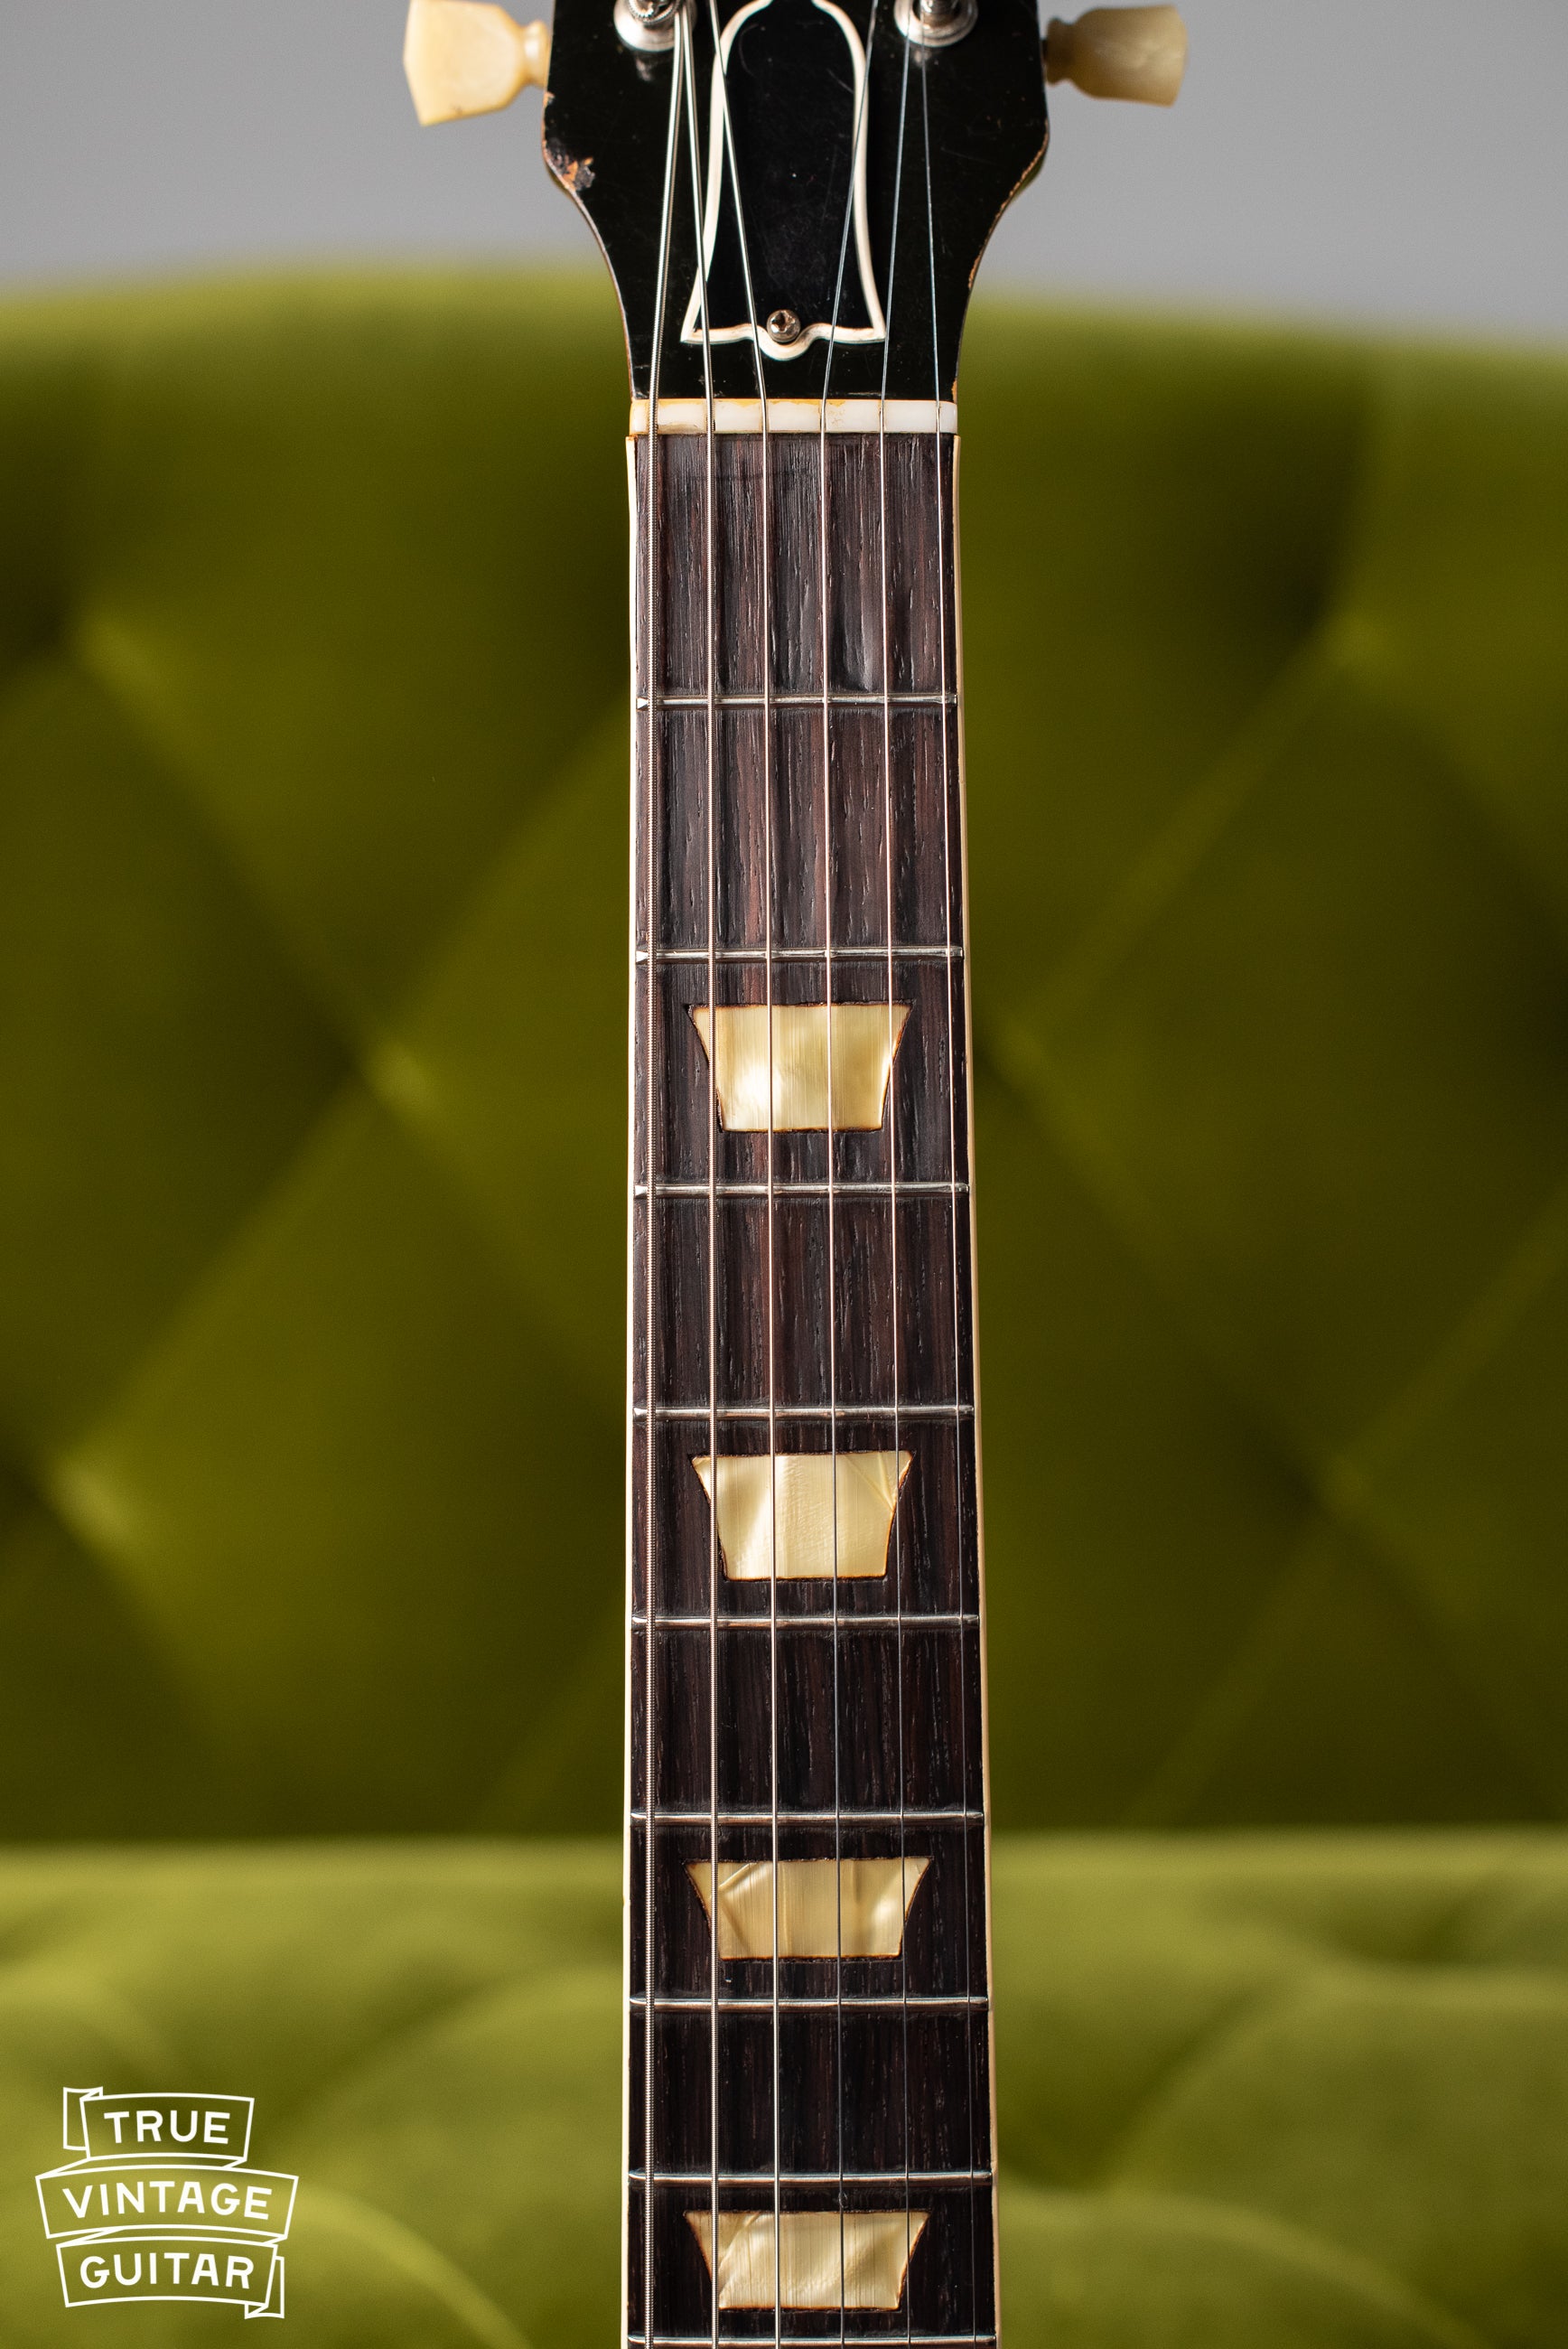 Fretboard, trapezoid inlays, Vintage 1954 Gibson Les Paul goldtop